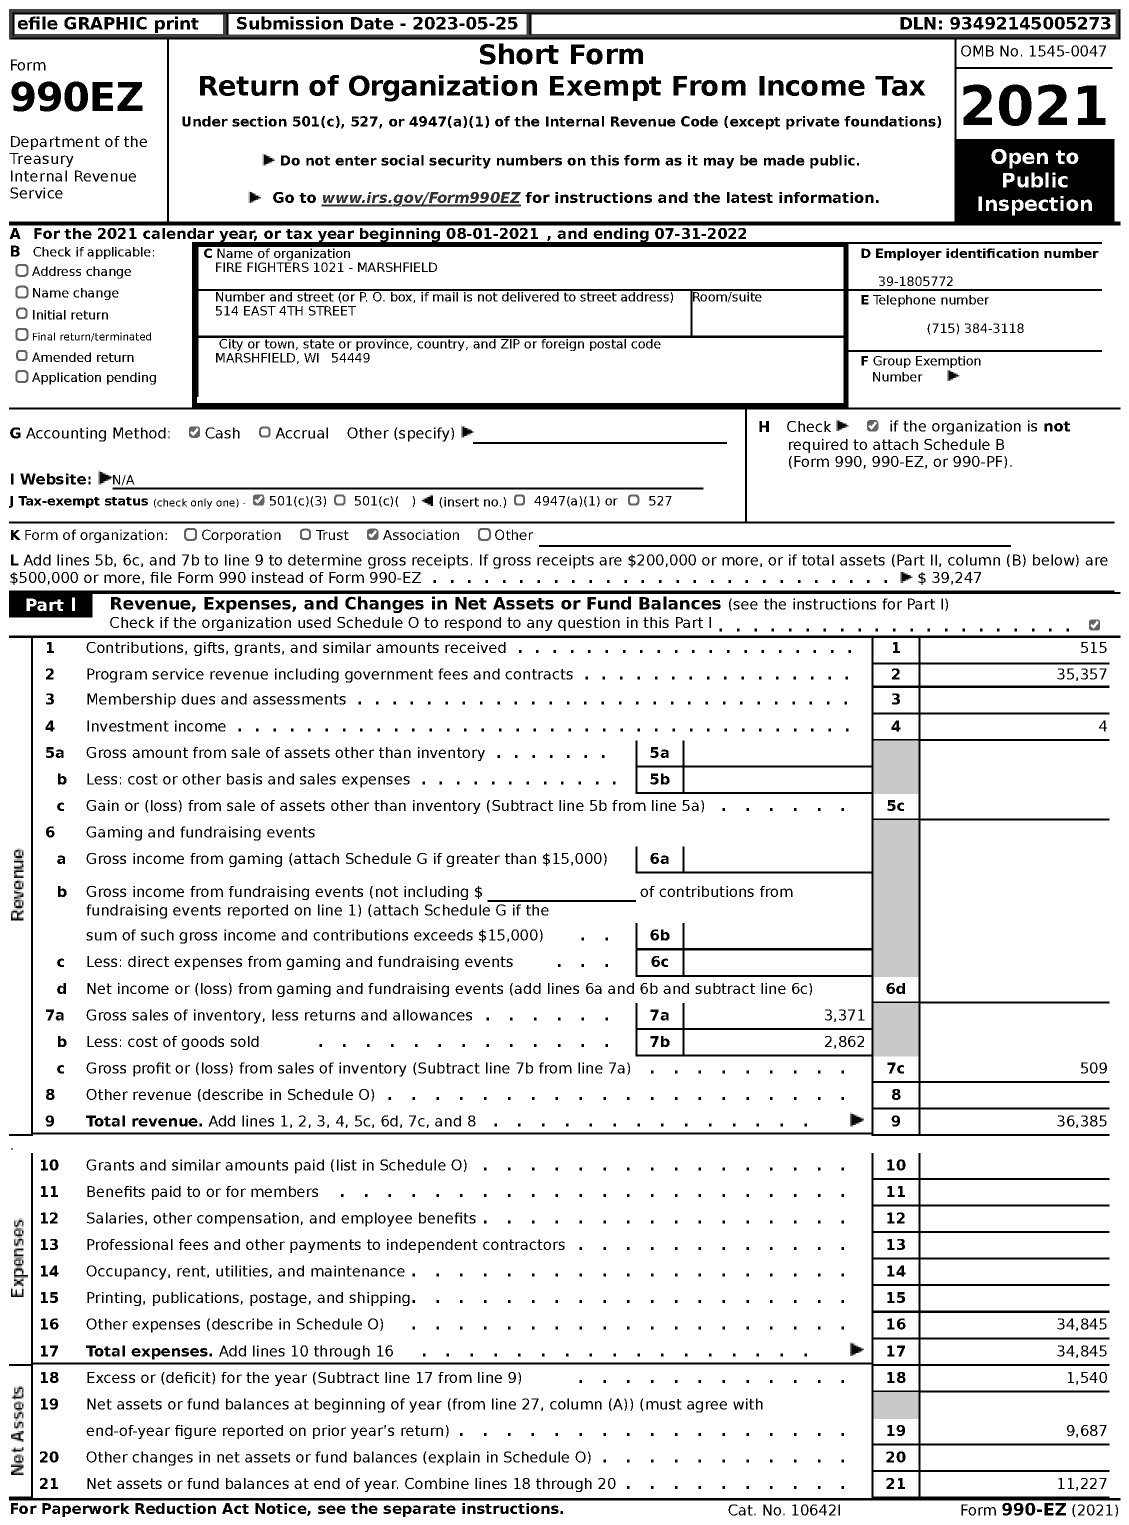 Image of first page of 2021 Form 990EZ for Fire Fighters 1021 - 1021-marshfield